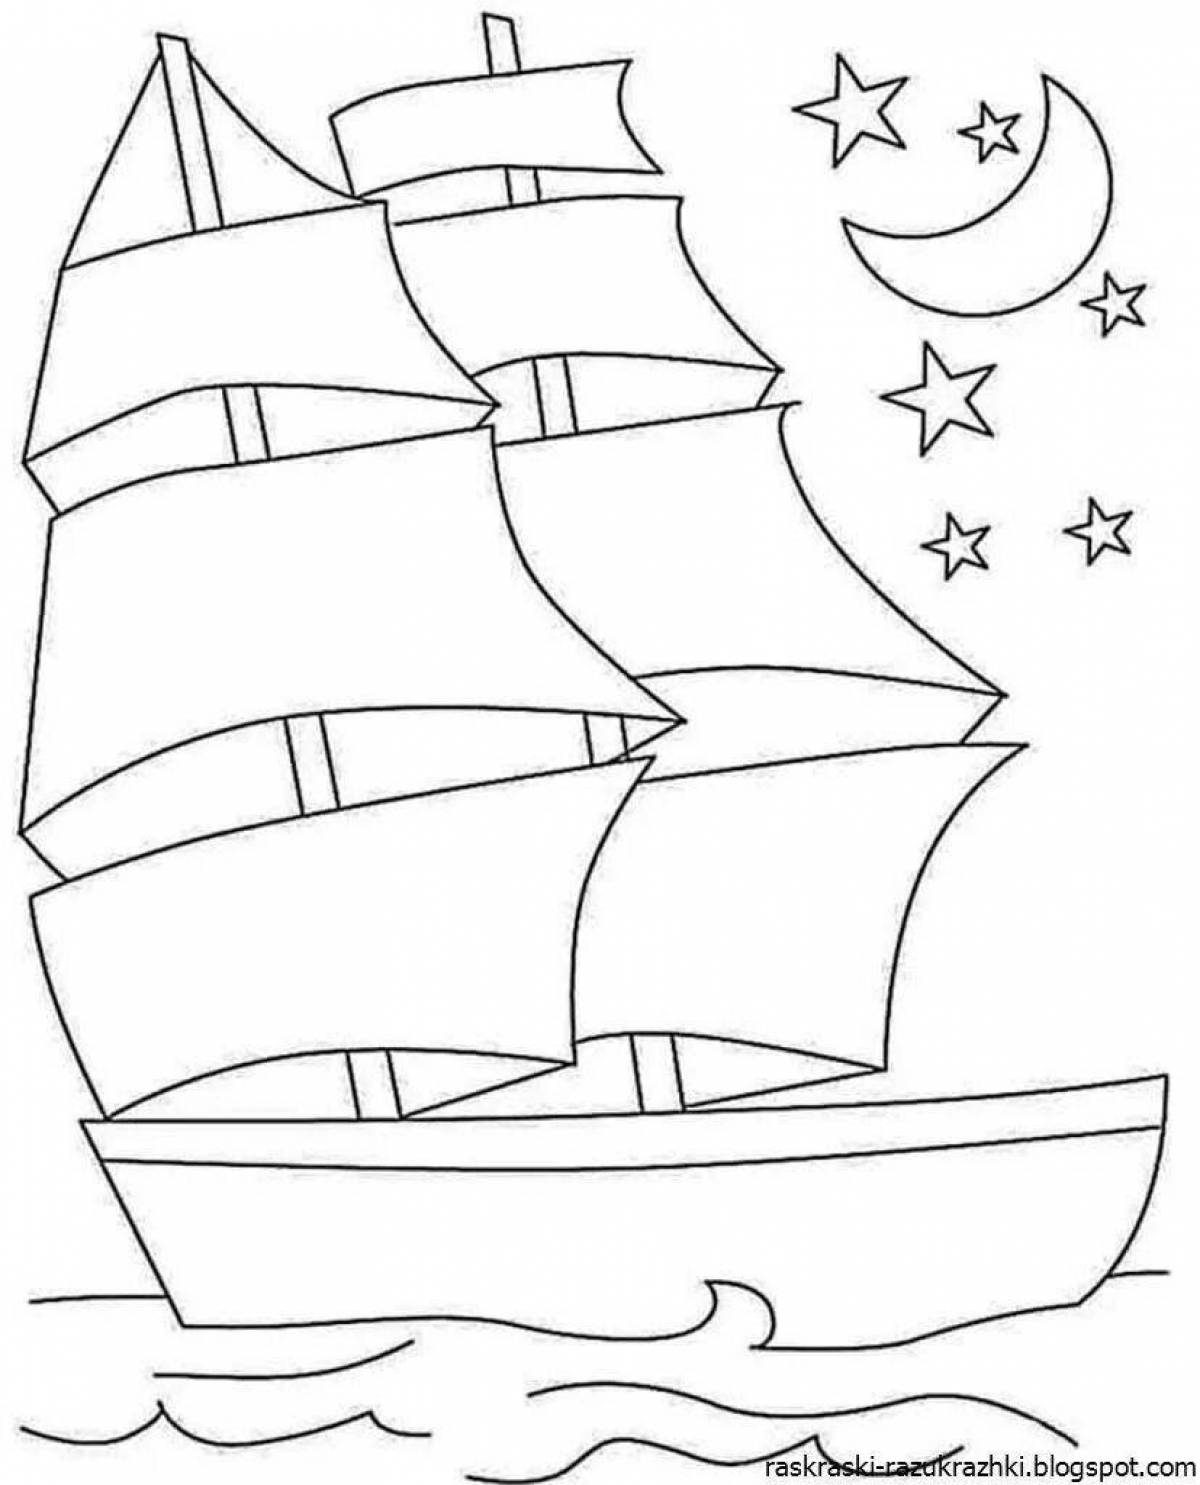 Exquisite ship coloring book for 5-6 year olds